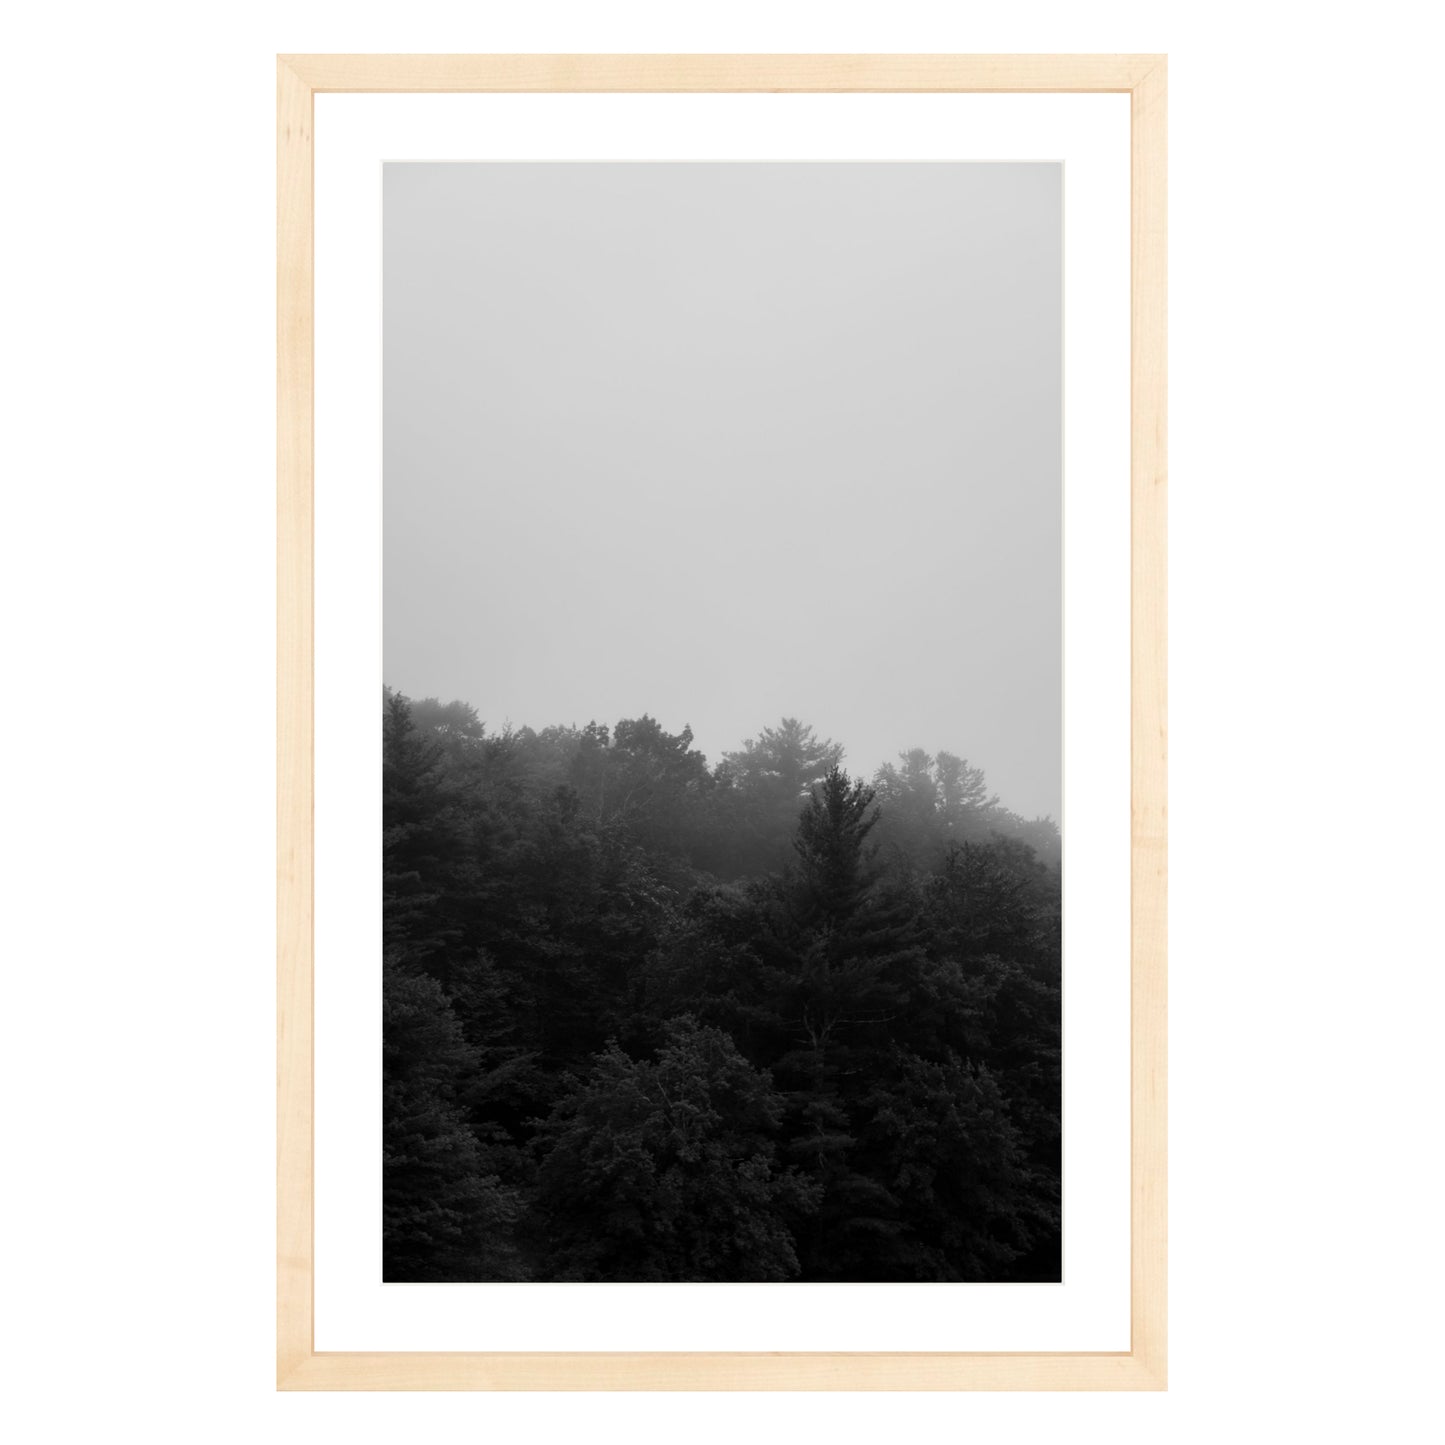 Photograph of trees in fog in natural wood frame with white mat